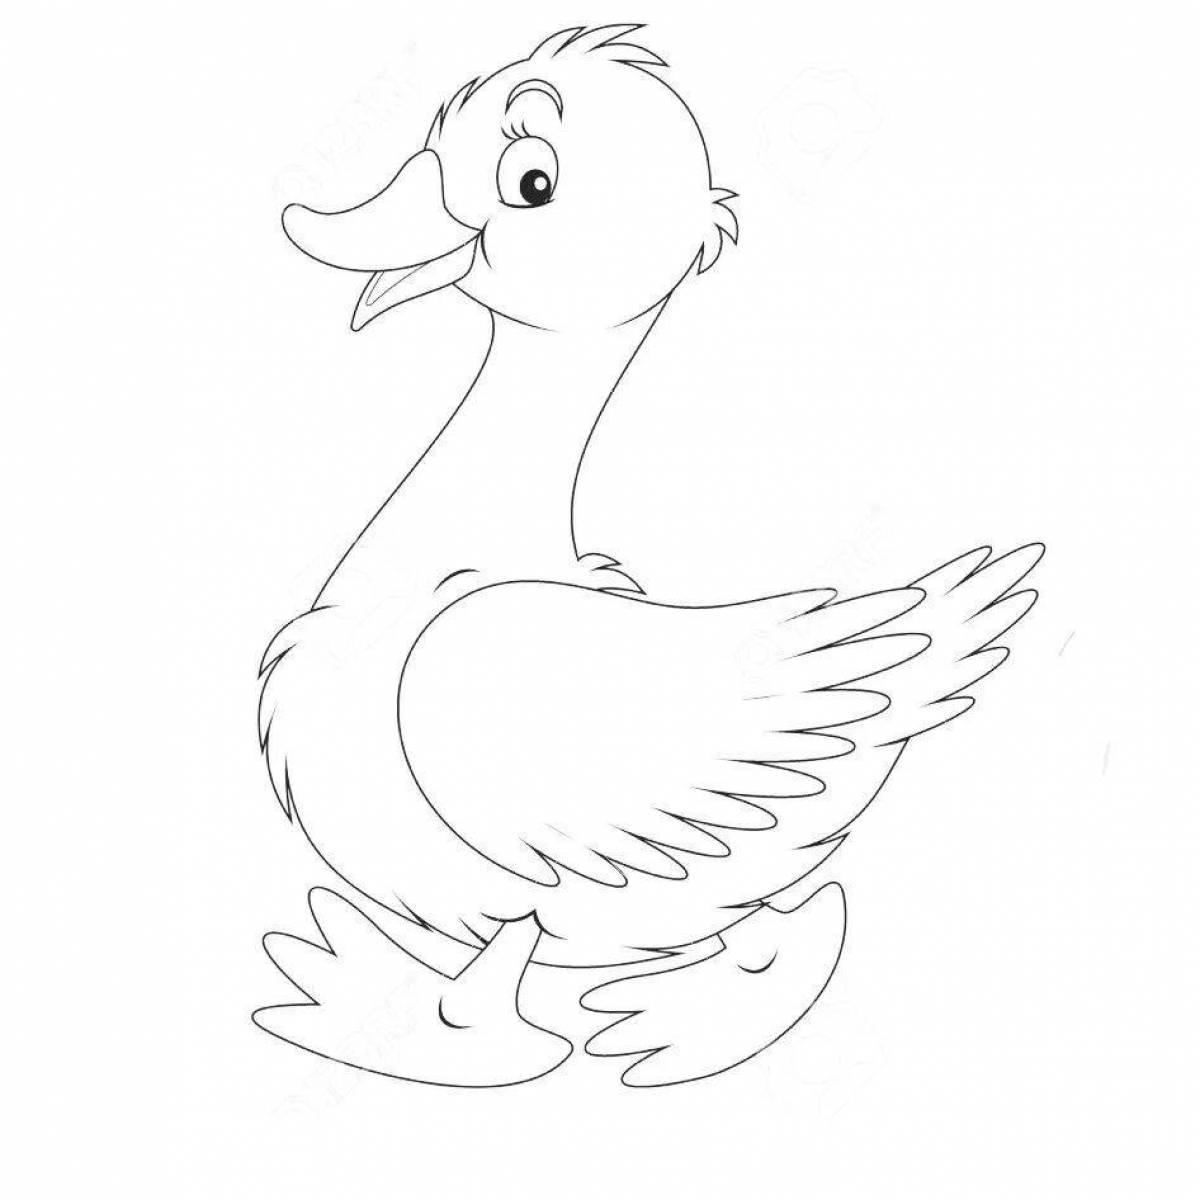 Colored goose coloring page for kids